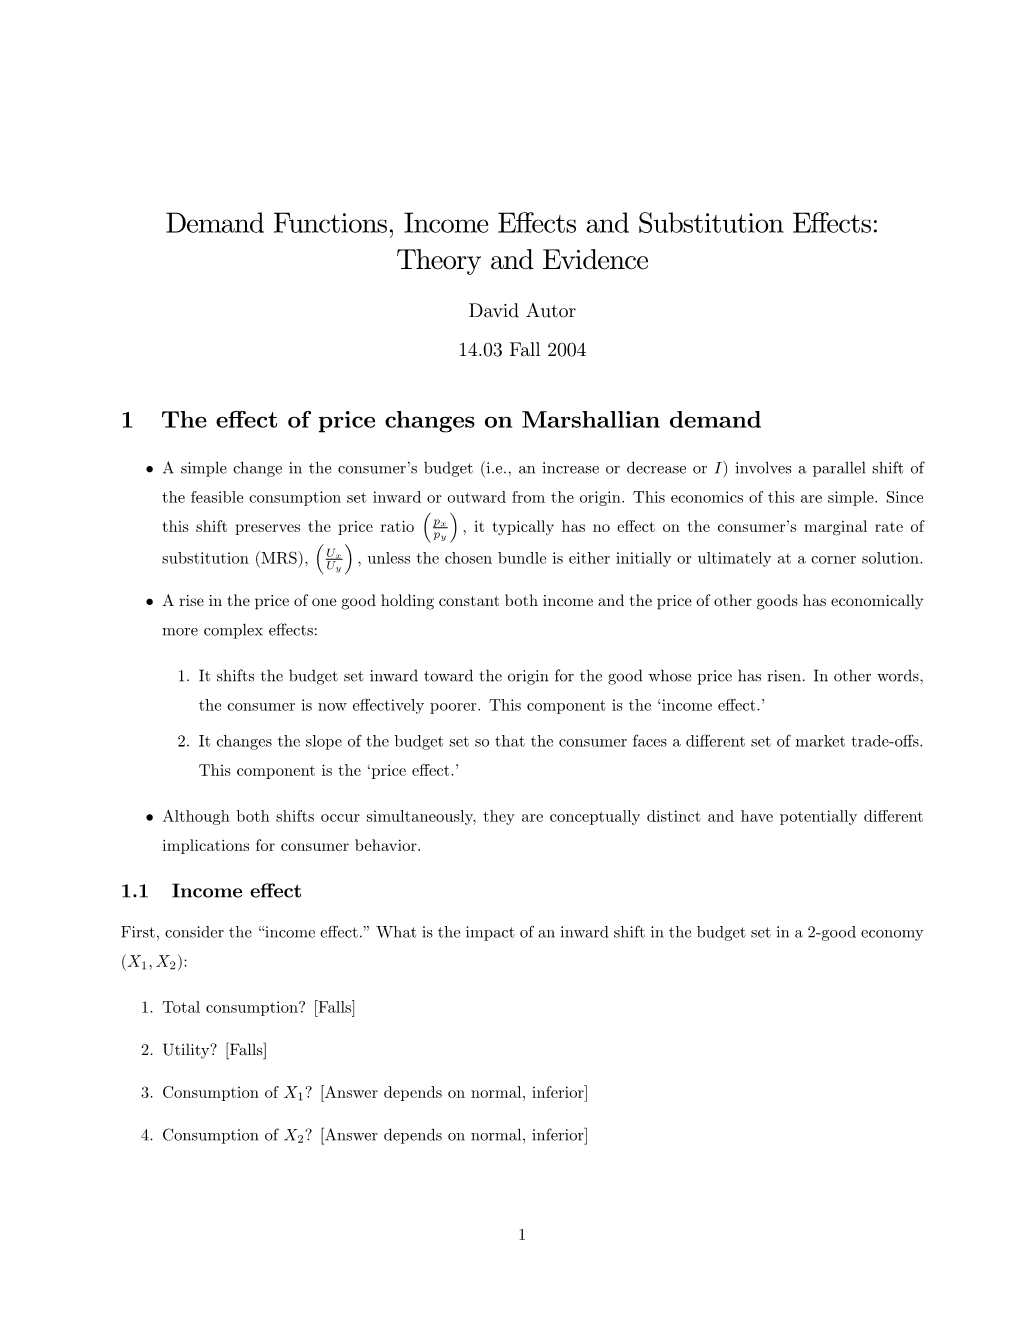 Demand Functions, Income Effects and Substitution